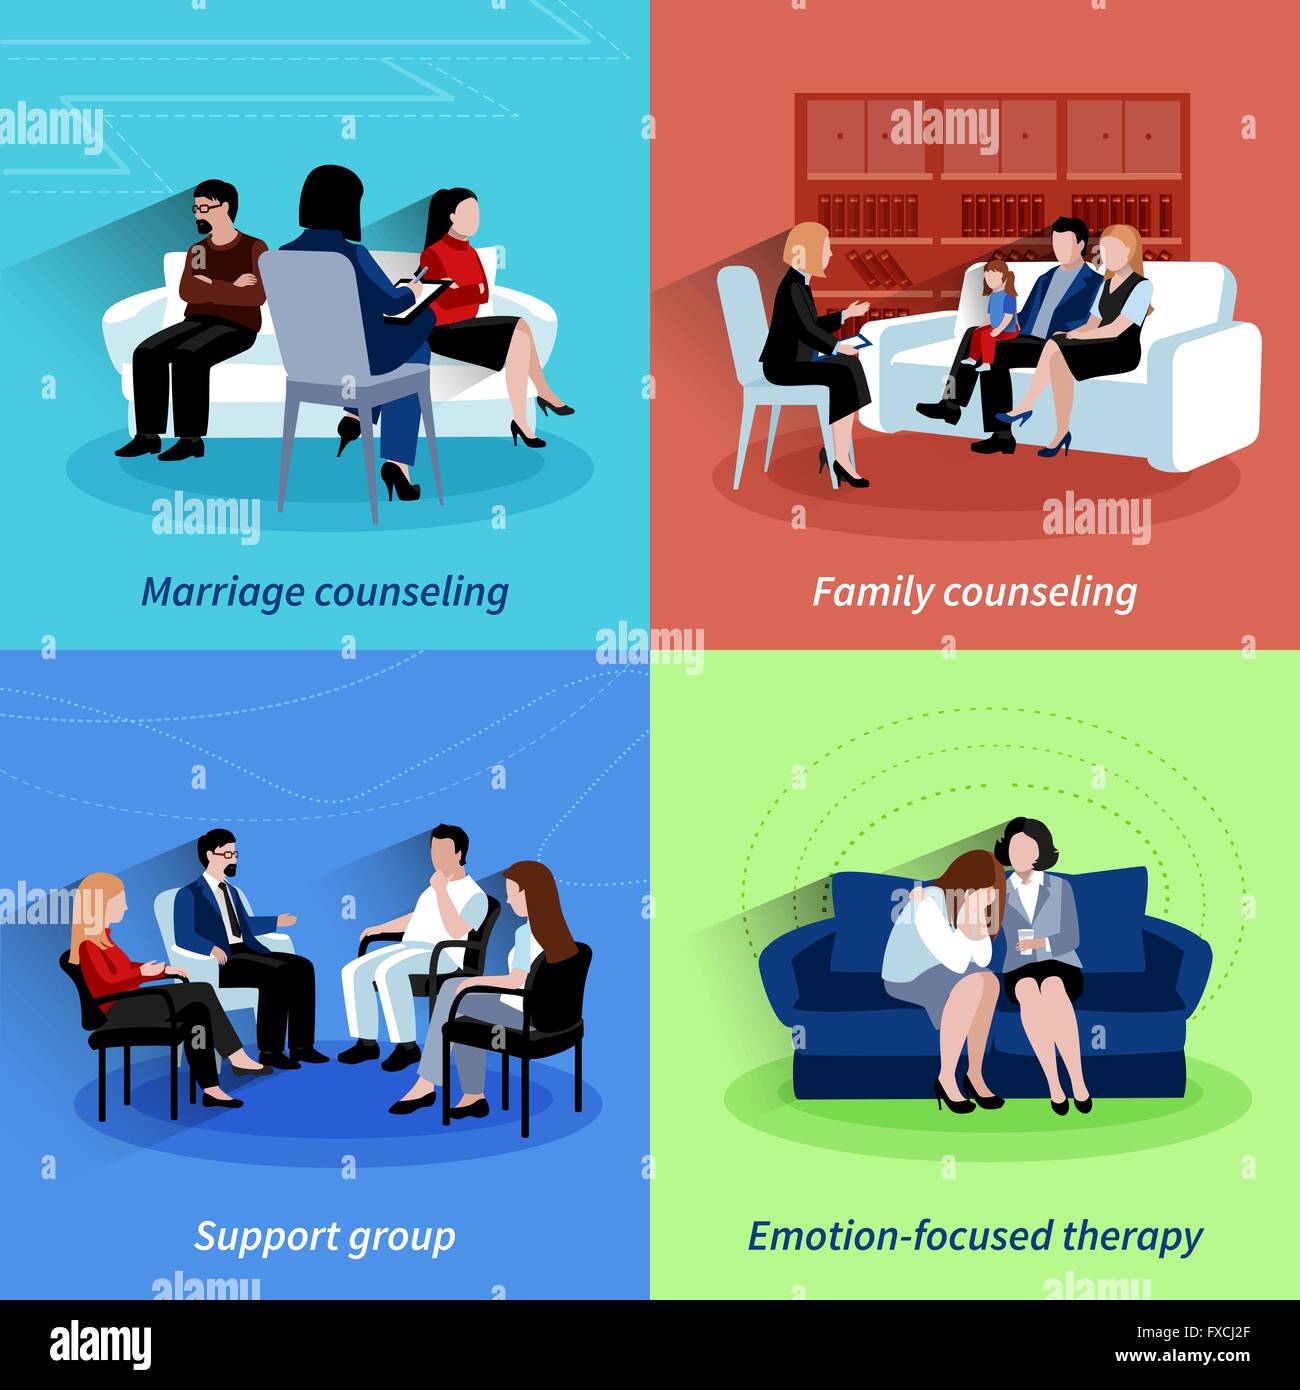 Relationship counseling 4 flat icons quare Stock Vector